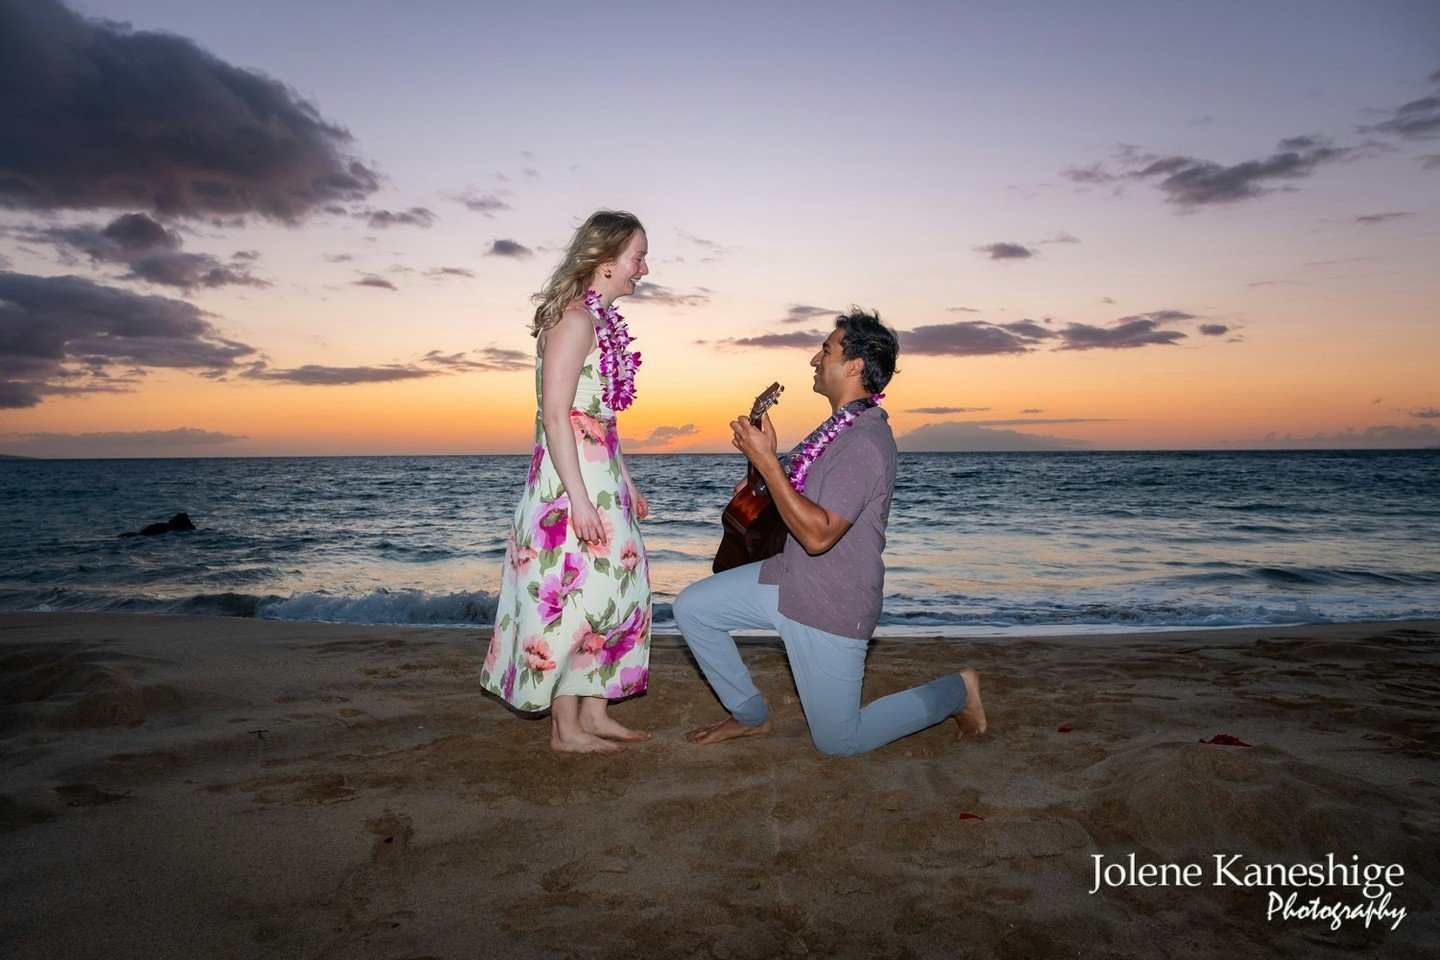 A magical sunset serenade on the beach &ndash; where music meets romance and hearts sing in harmony. 🌅🎸💍

#LoveStruckMelodies #BeachProposal #SheSaidYes #surpriseproposal #hawaiiproposal #mauiproposal #engagementphotographer #proposalphotography #